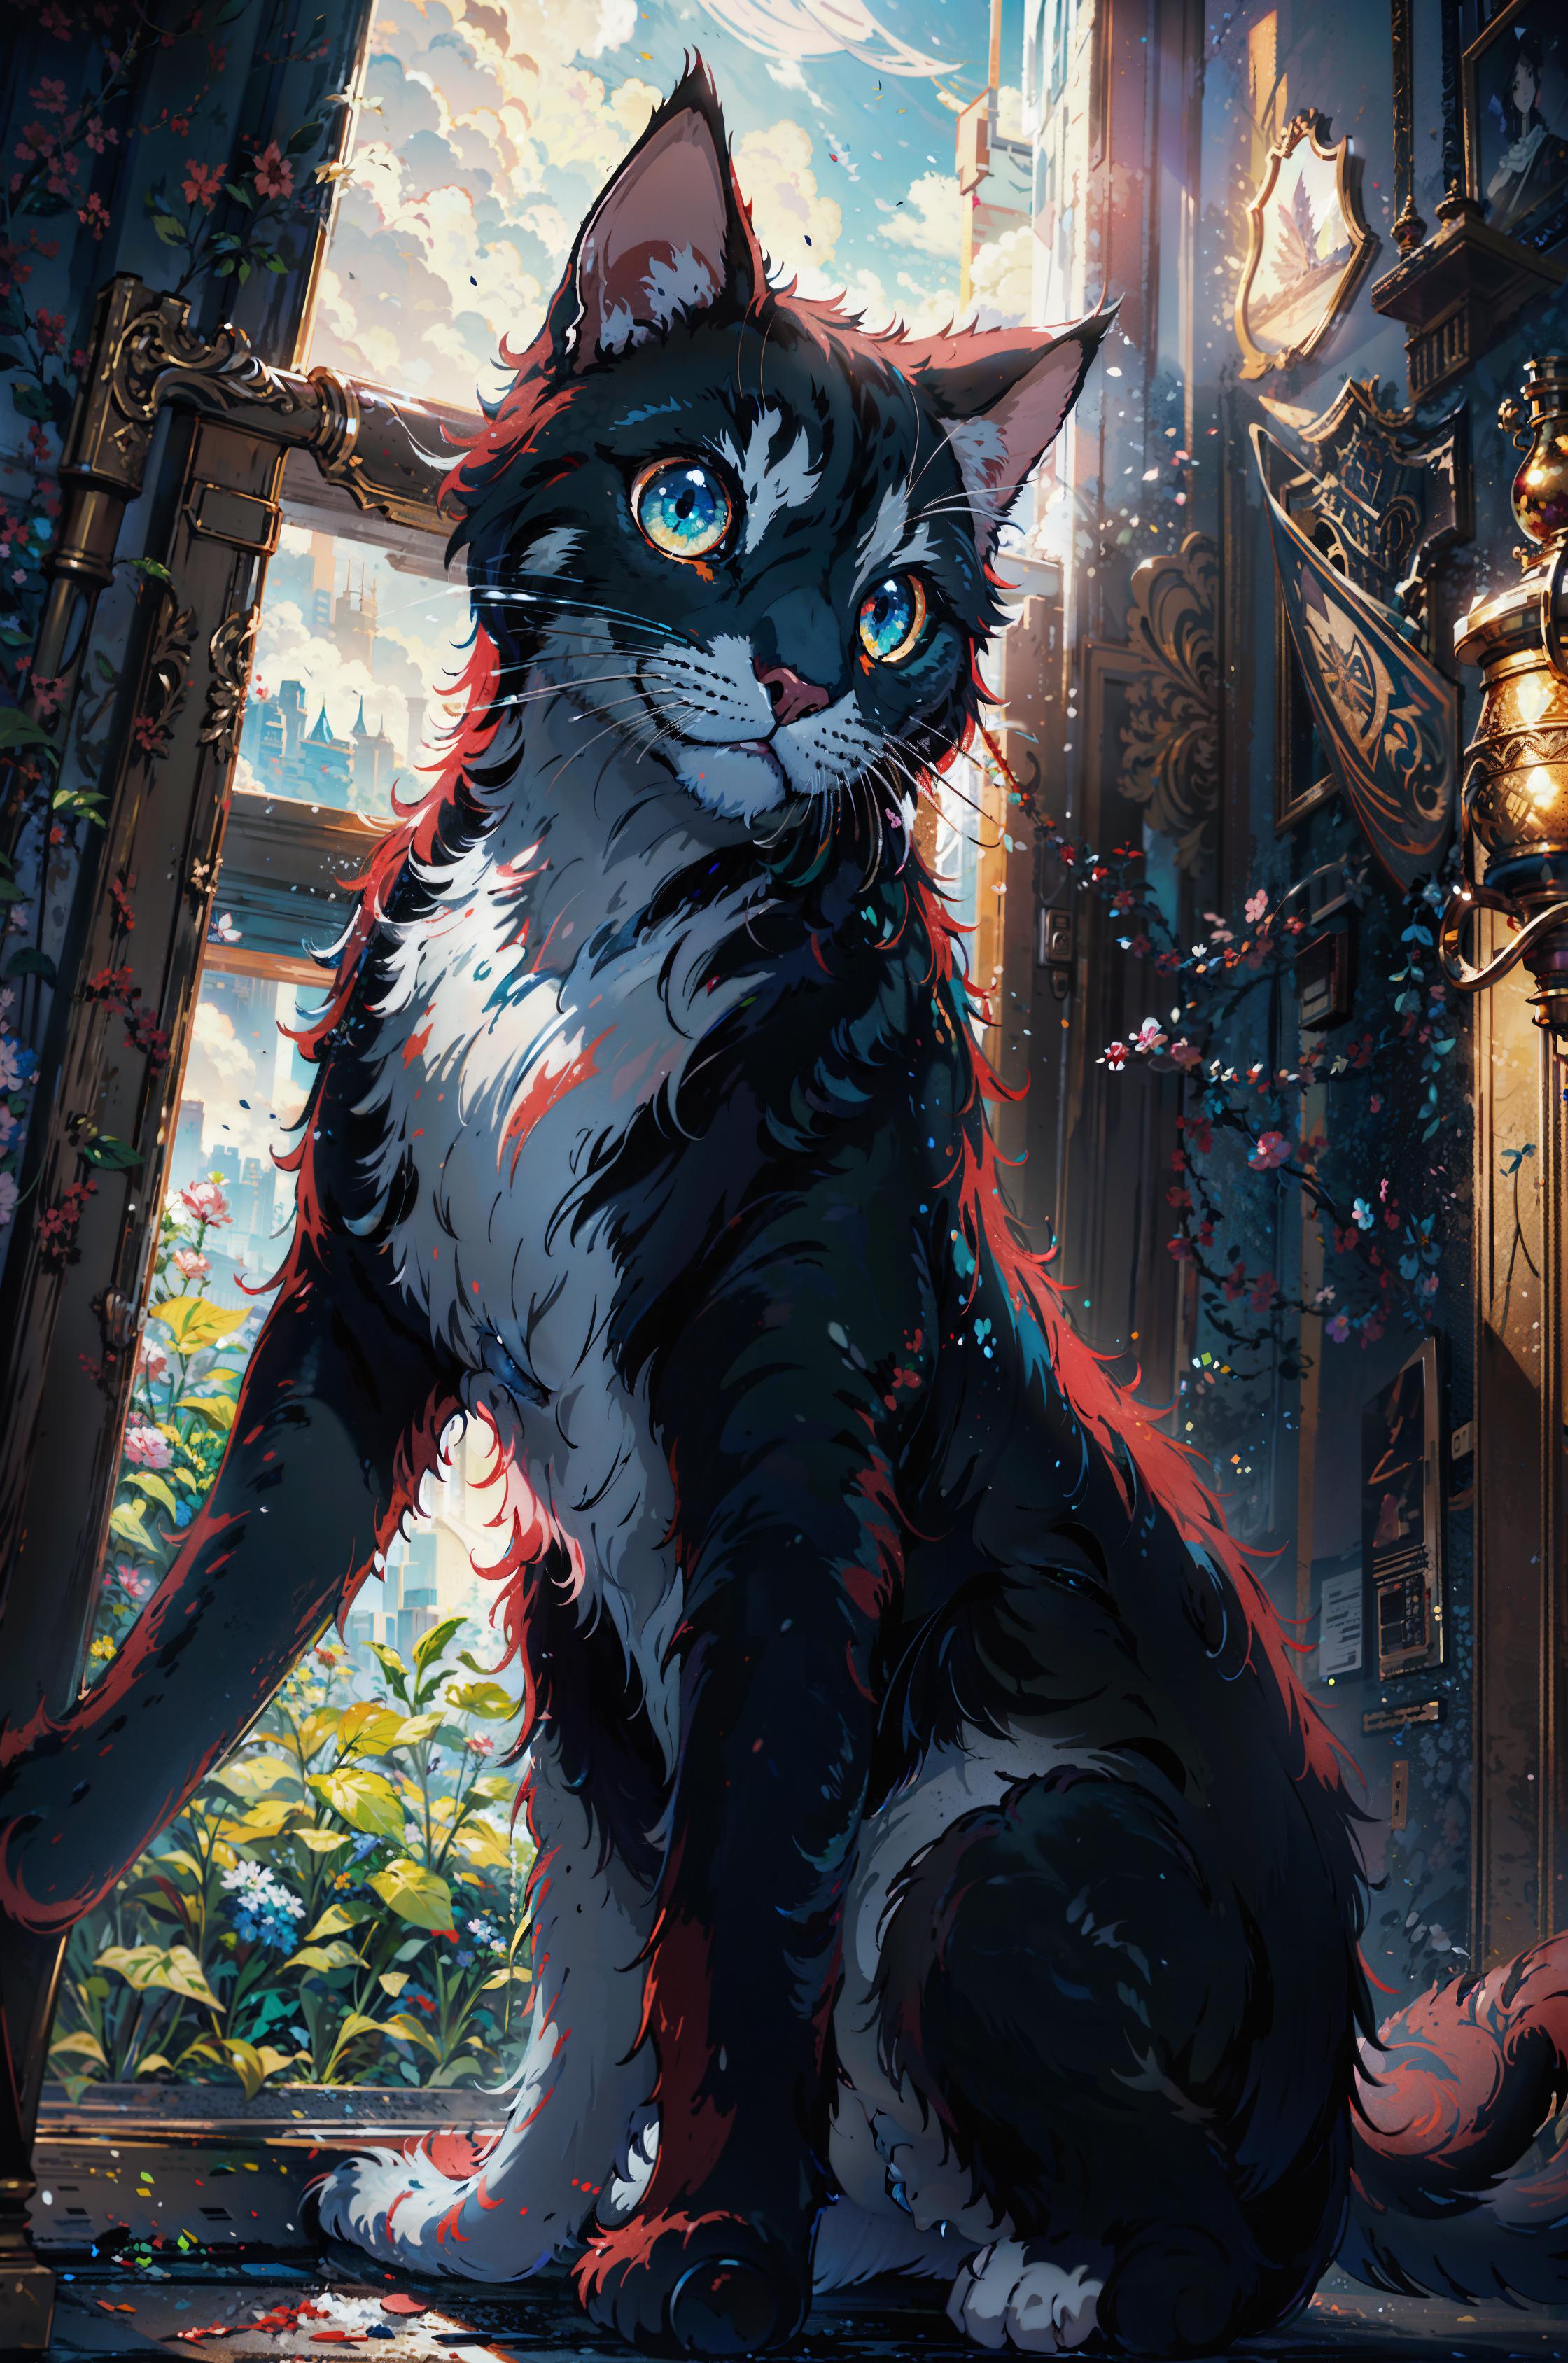 Anime-style black and white cat with blue eyes and red tail, standing in a doorway.